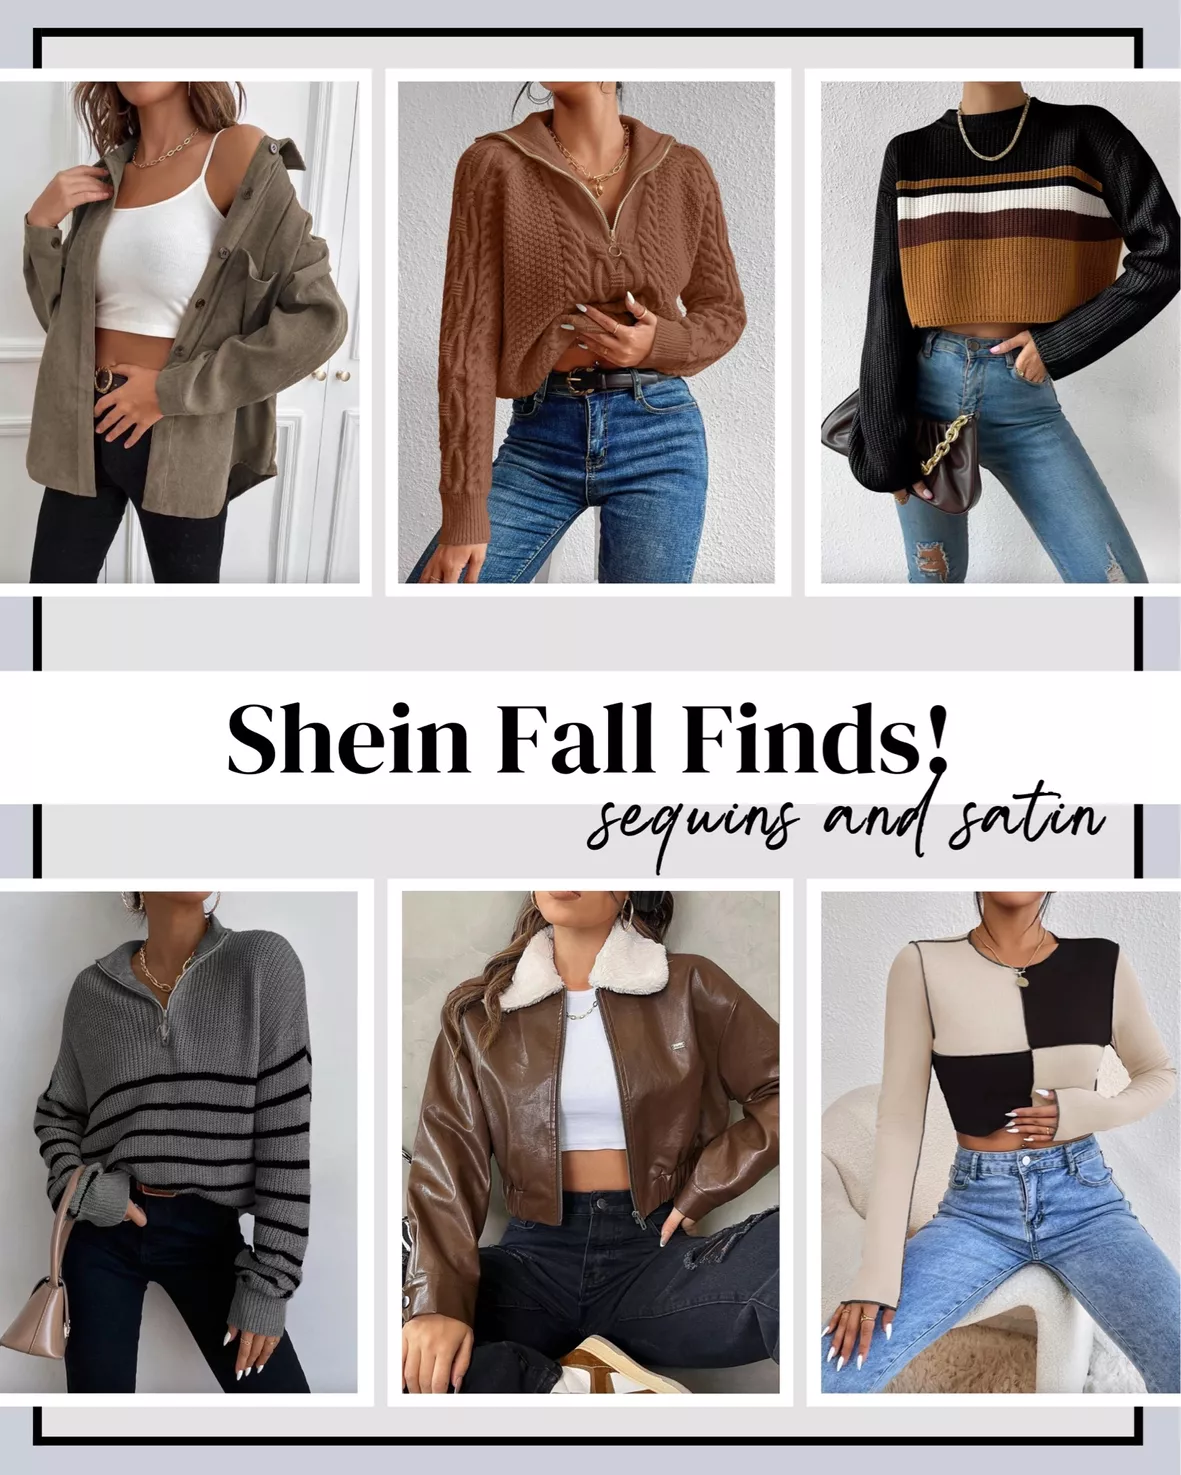 7 best outfits, shoes, and accessories on shein from a students perspective  ., by iilovenardowickk💞.